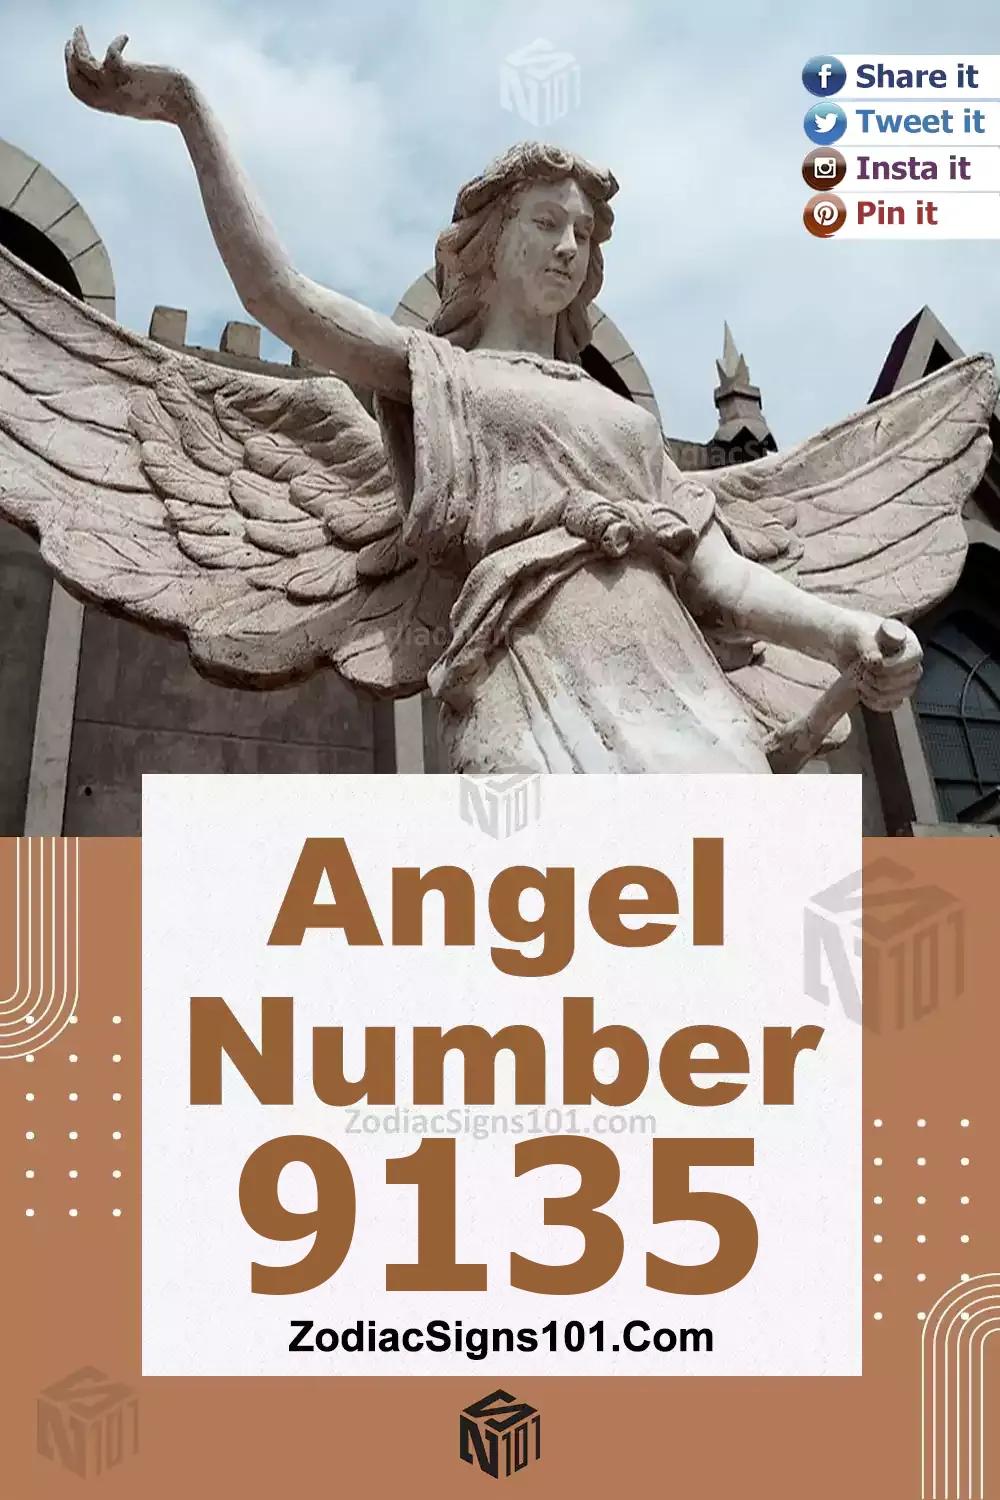 9135 Angel Number Meaning